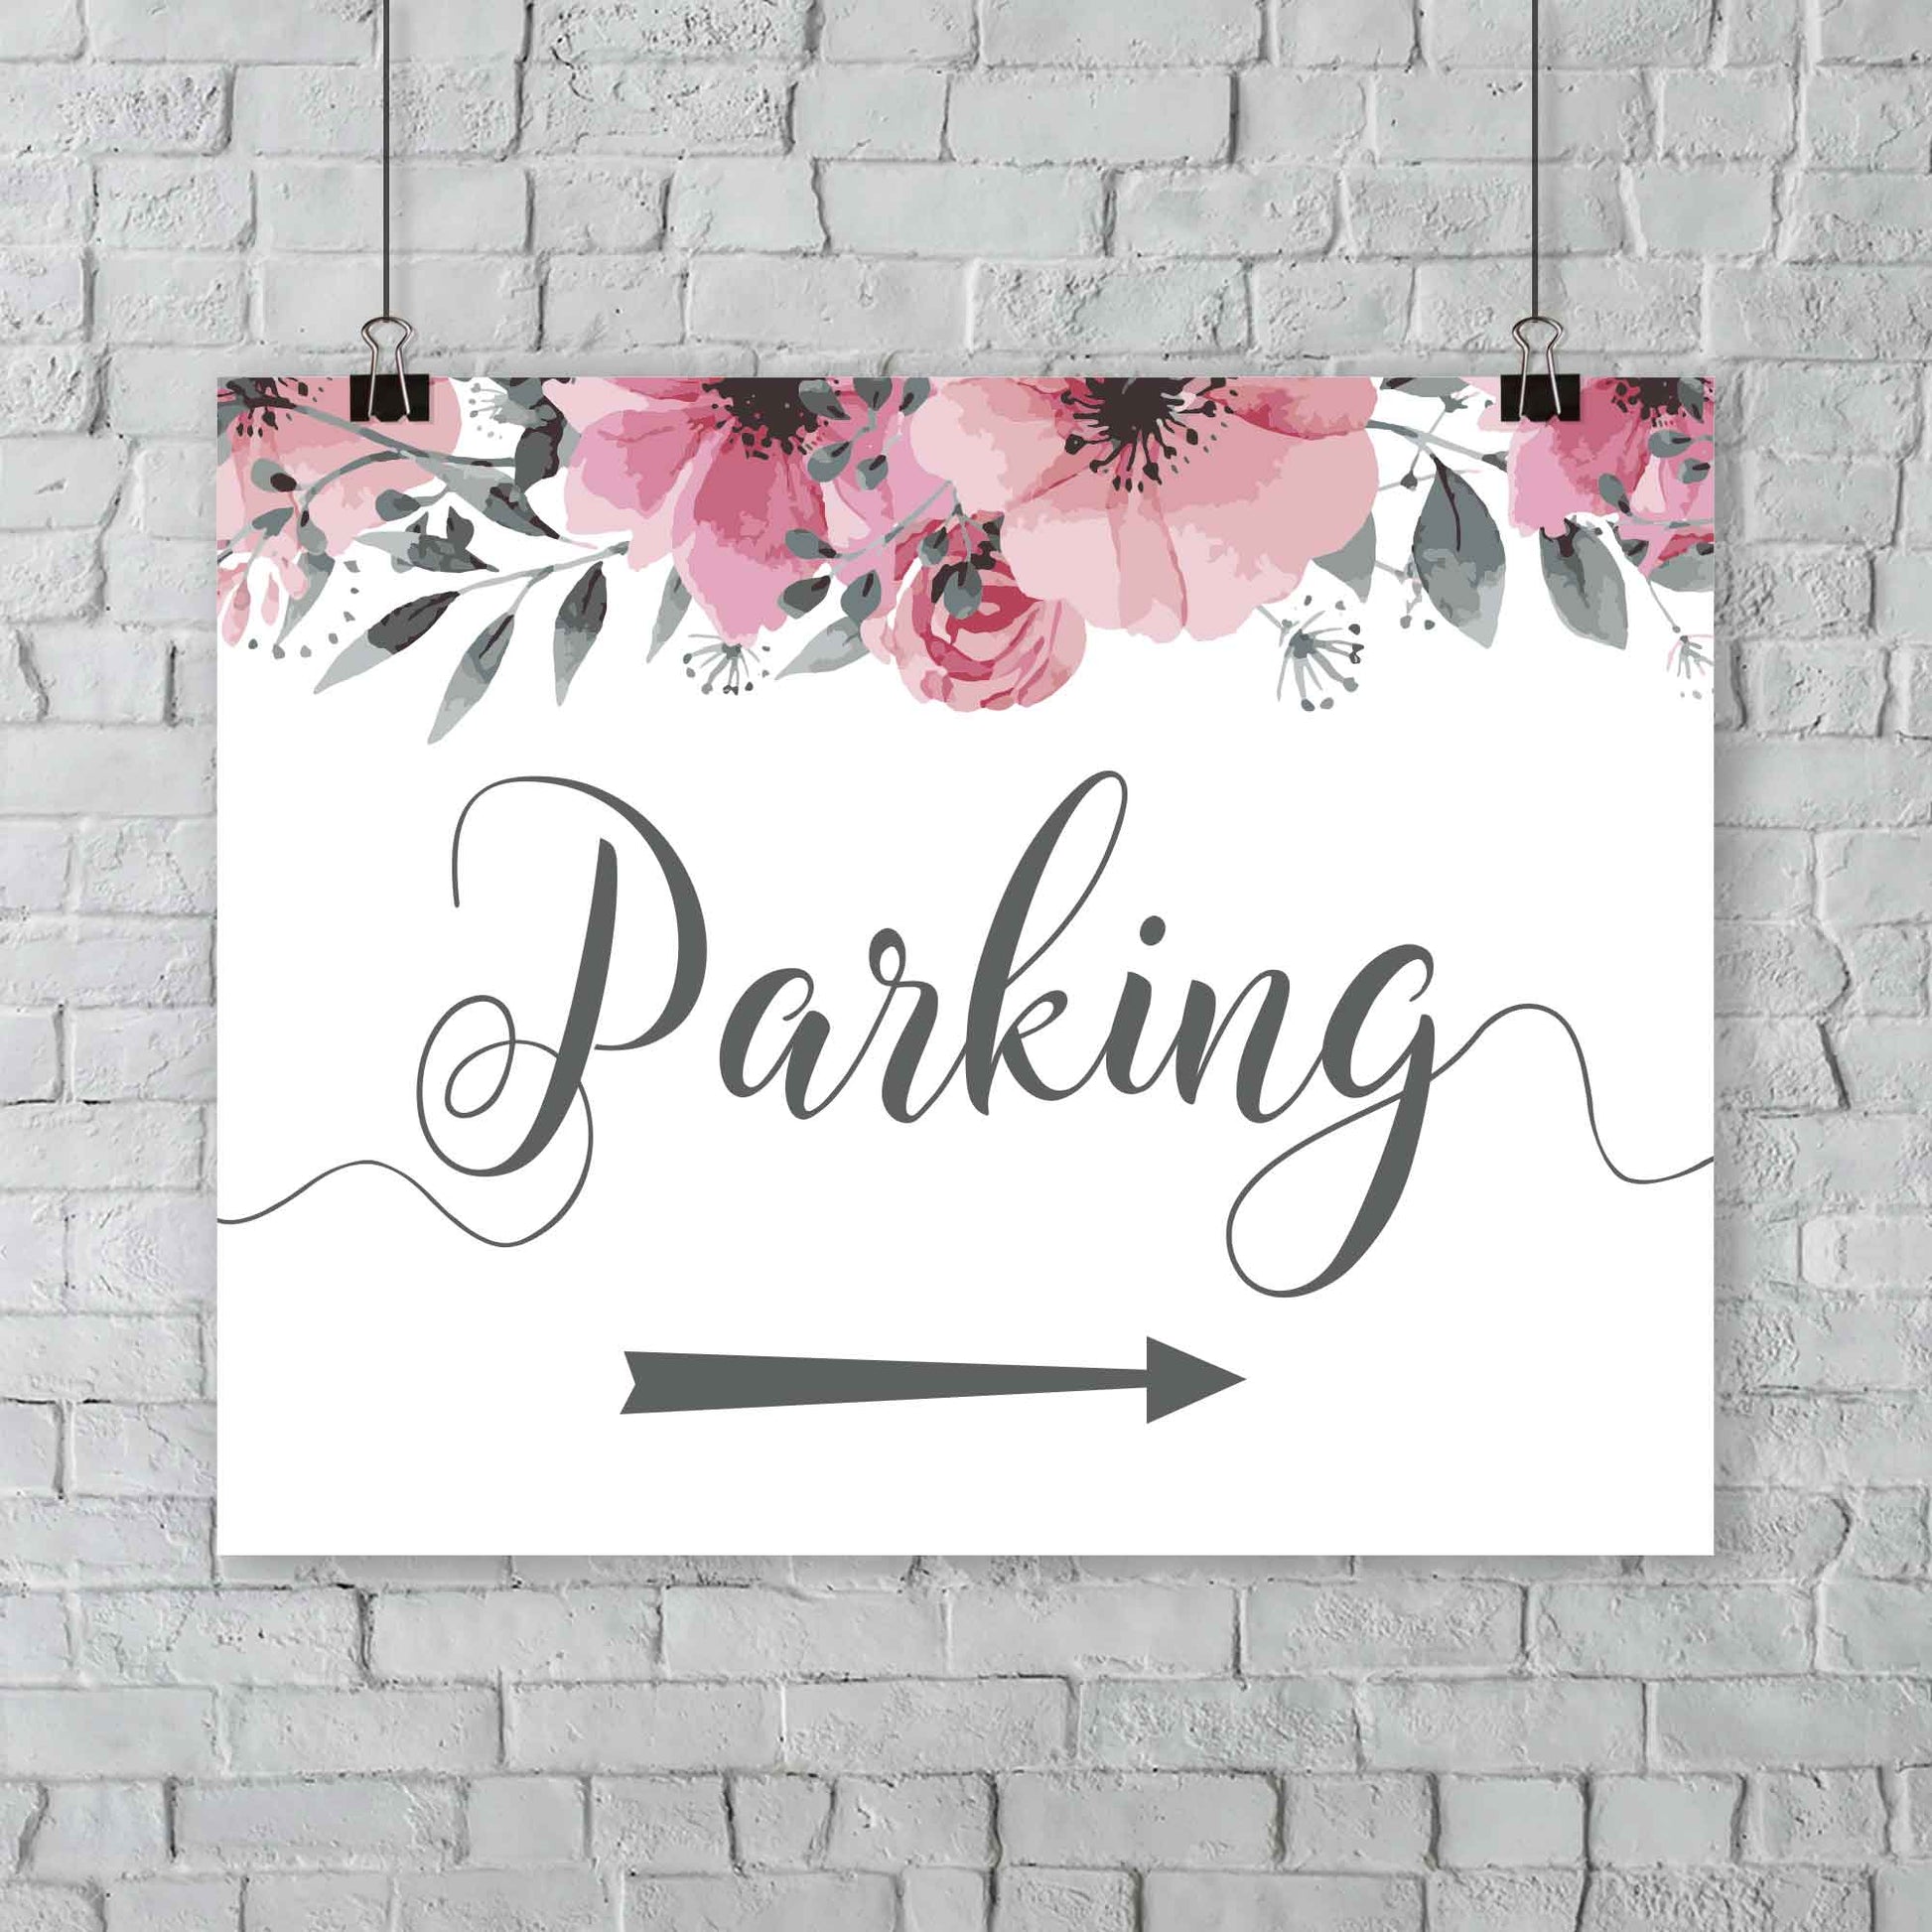 wedding car port arrow sign with floral border hanging from outdoor wall